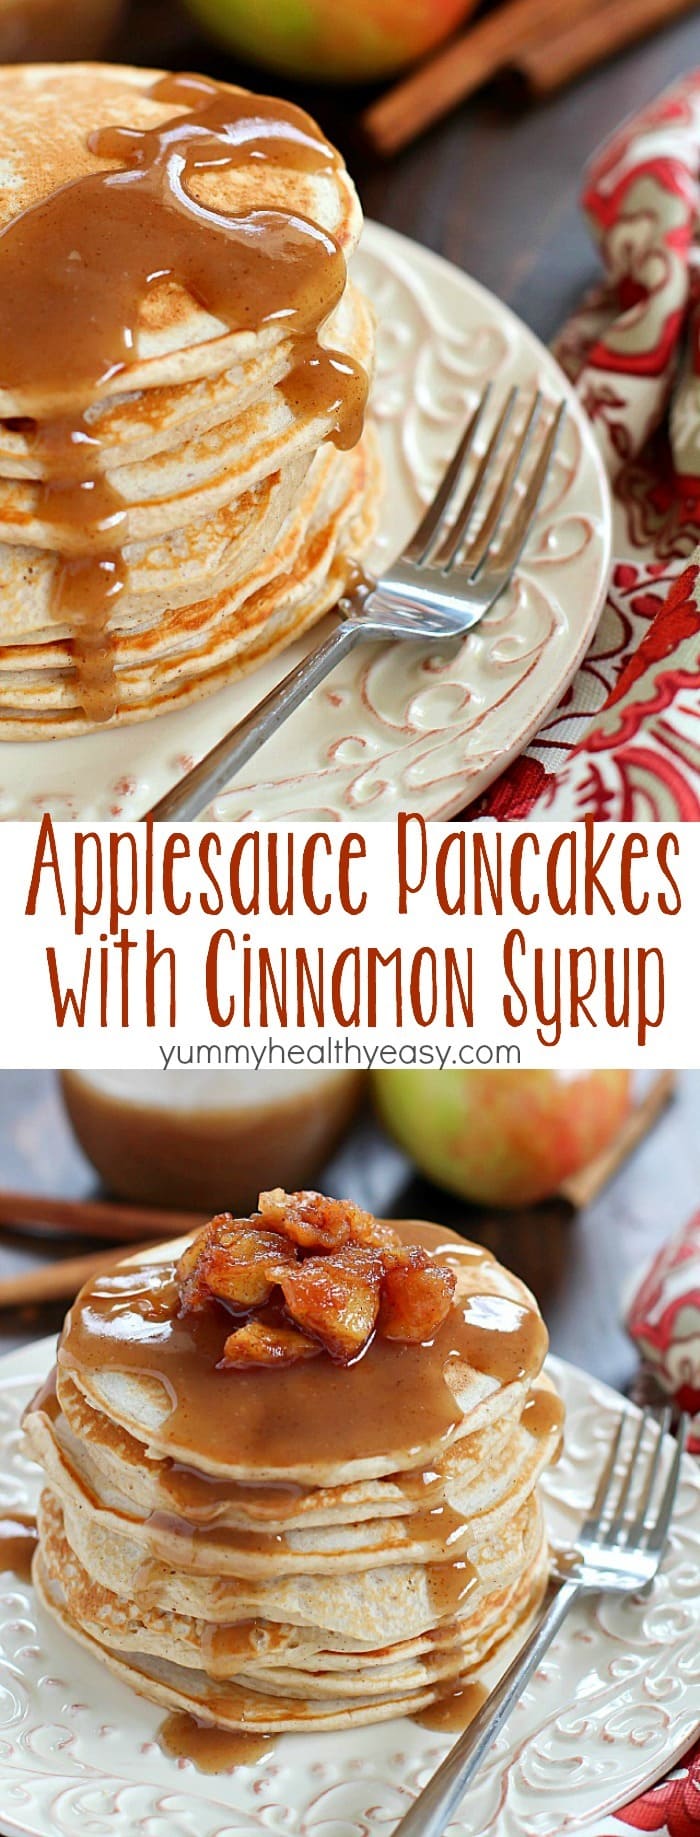 Start your morning with some Applesauce Pancakes with Cinnamon Syrup! These pancakes are healthy, light, fluffy and full of fall flavors. The cinnamon syrup is to-die-for! You won't regret making up a batch of these for breakfast - or lunch or dinner! ;)